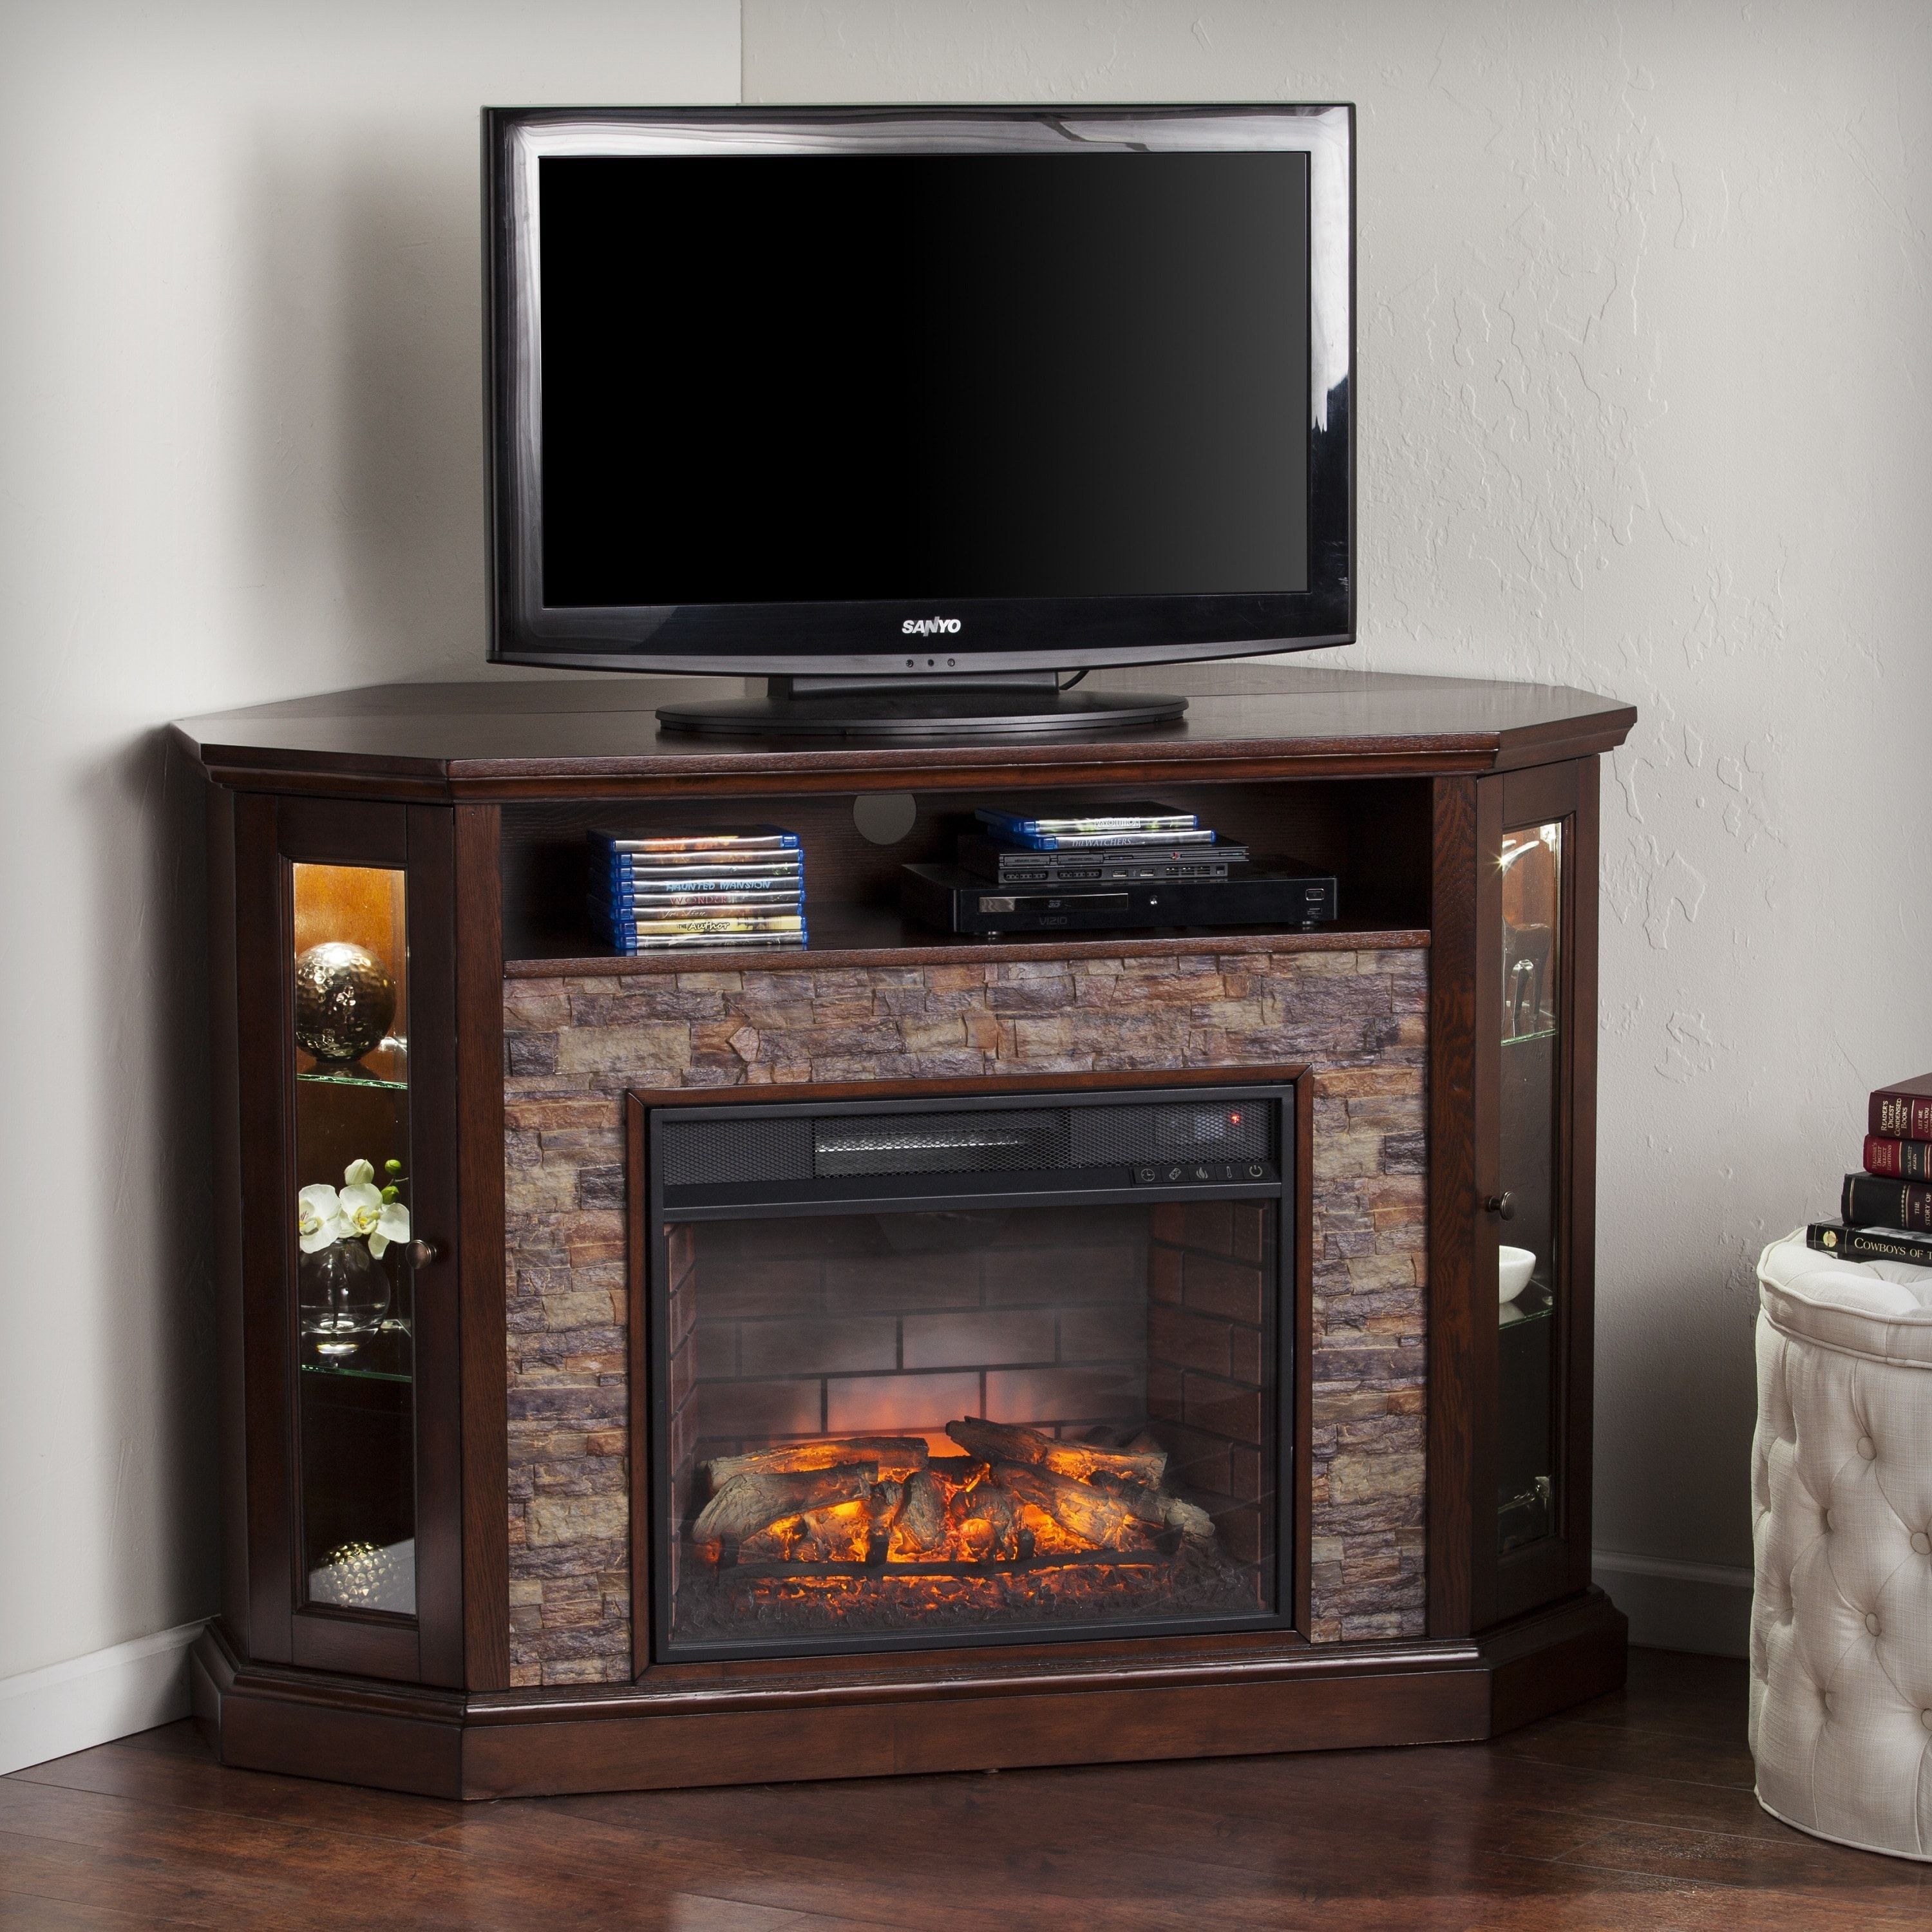 Faux Stone Fireplace Tv Stand Luxury Harper Blvd Ratner Faux Stone Corner Convertible Infrared